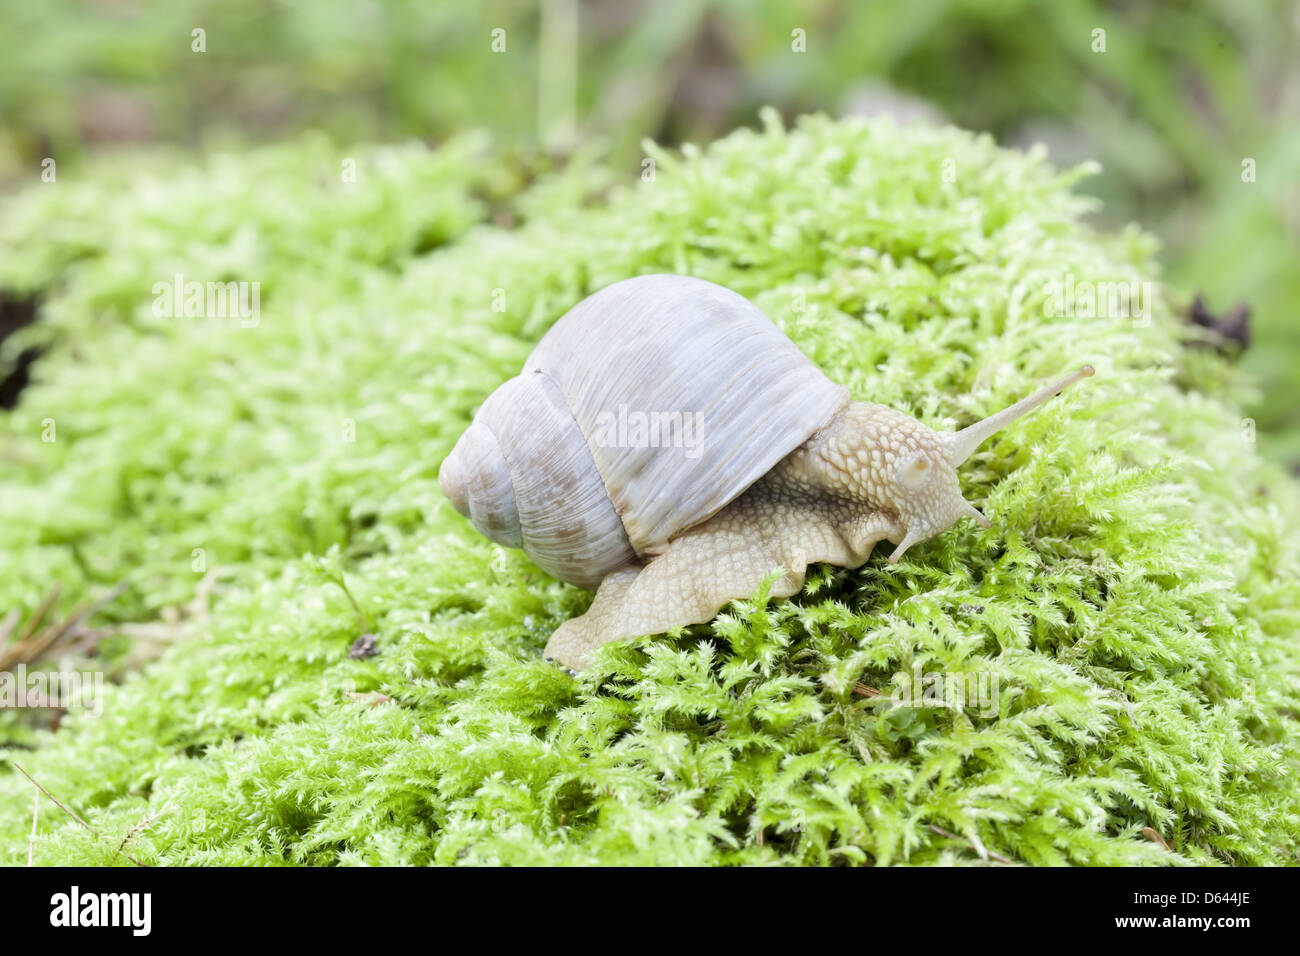 Snail crawling on the forest moss Stock Photo